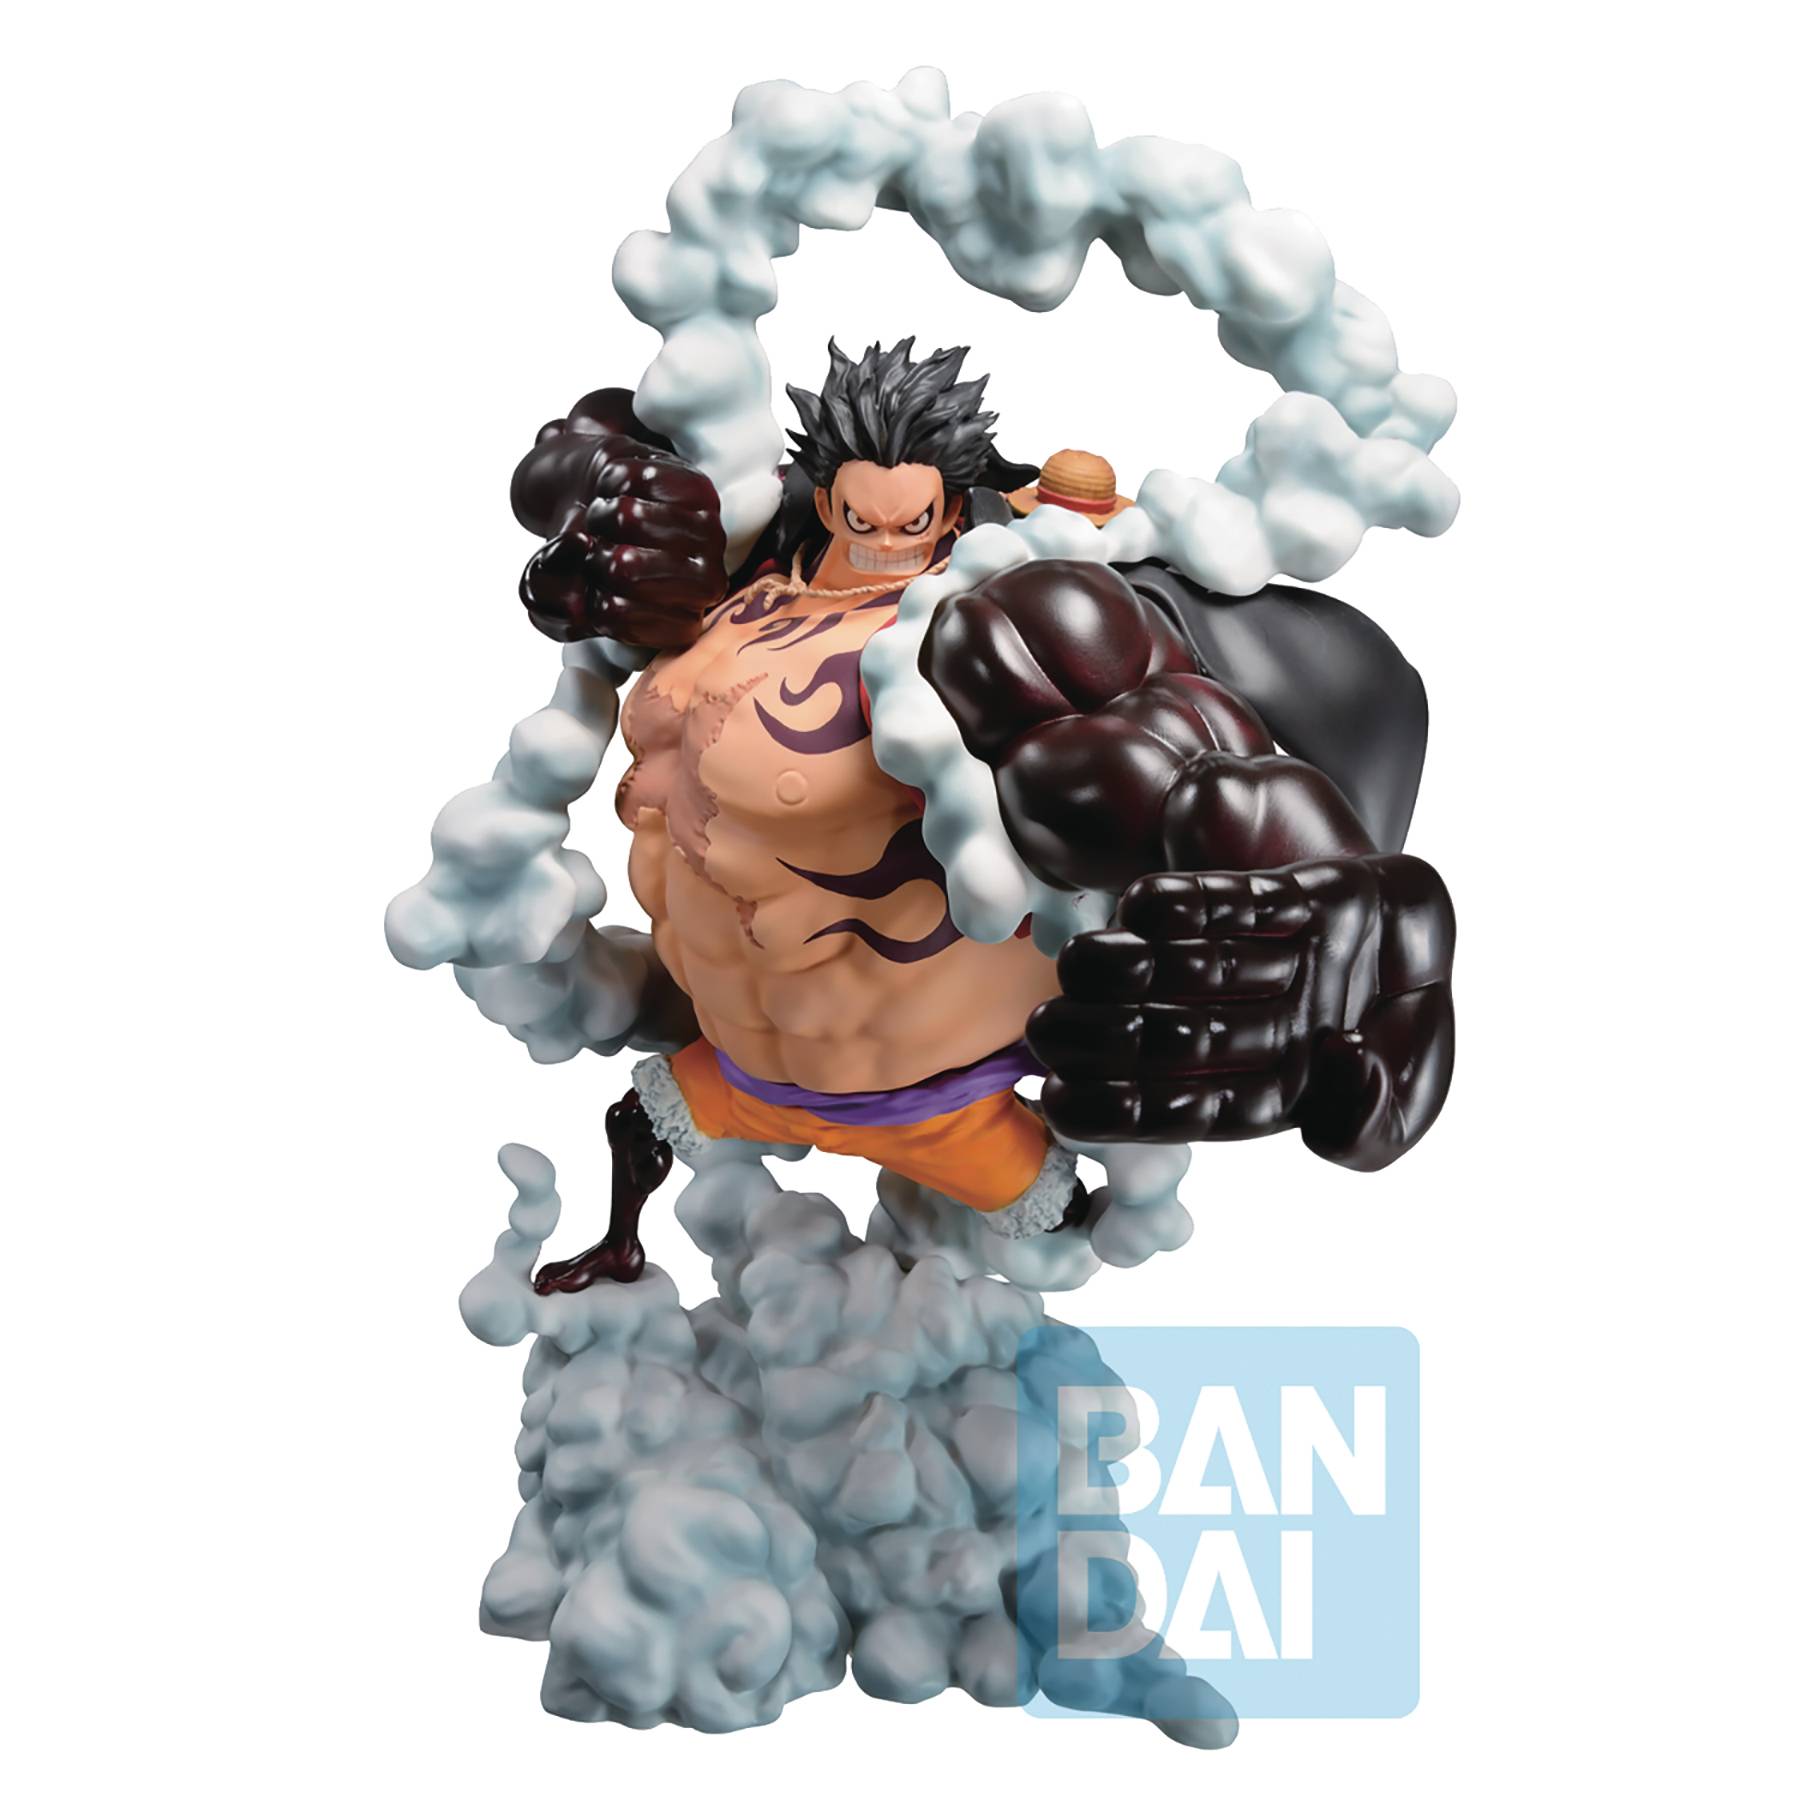 ONE PIECE WANO COUNTRY 3RD ACT MONKEY D LUFFY ICHIBAN FIG (N